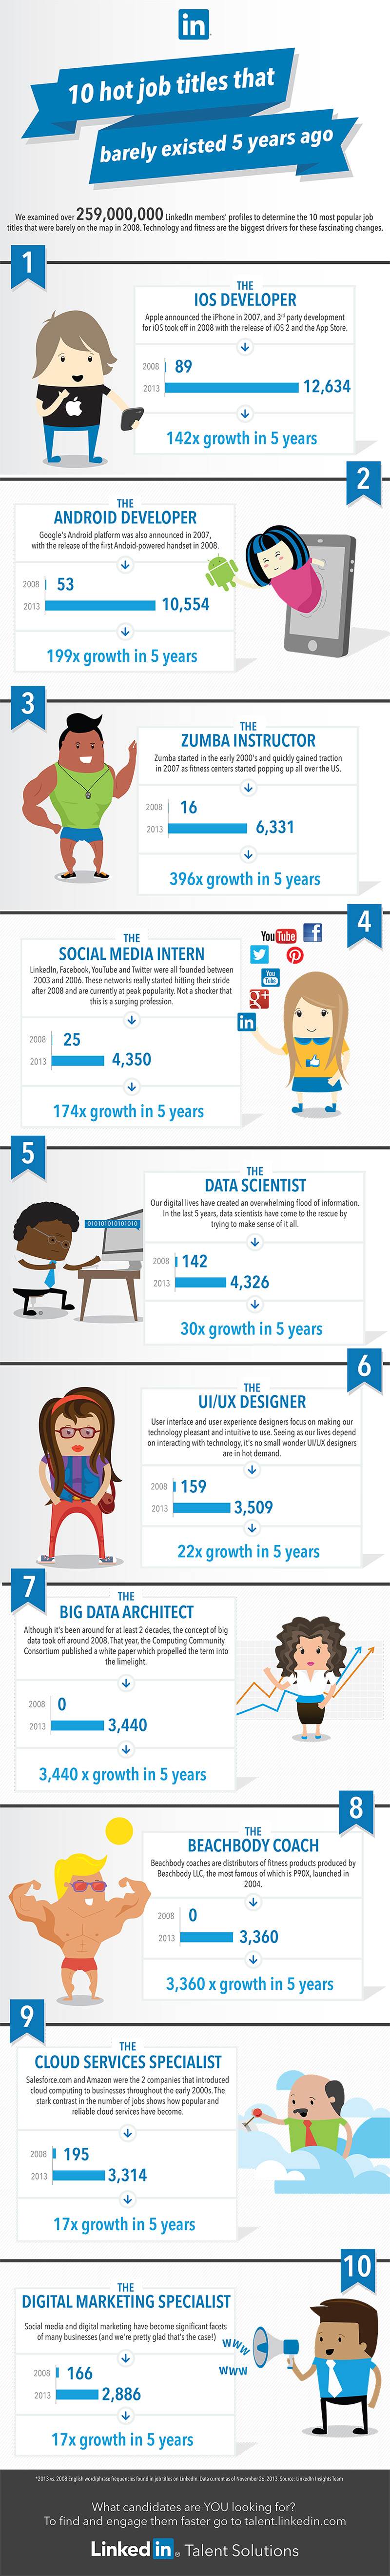 jobs that did not exist 5 years ago